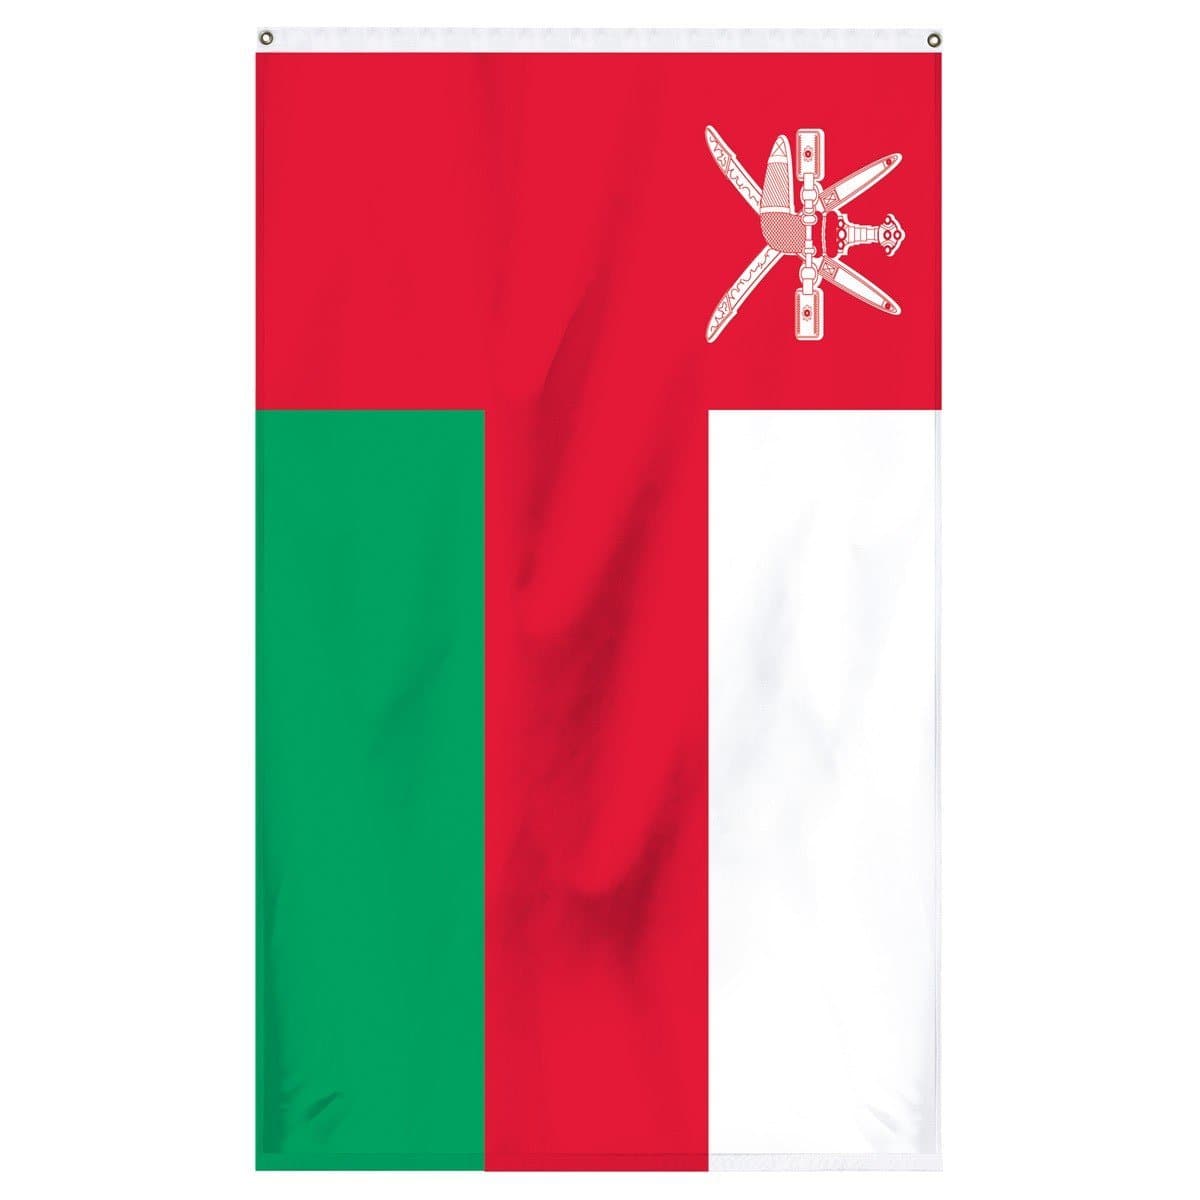 Oman national flag for sale to buy online